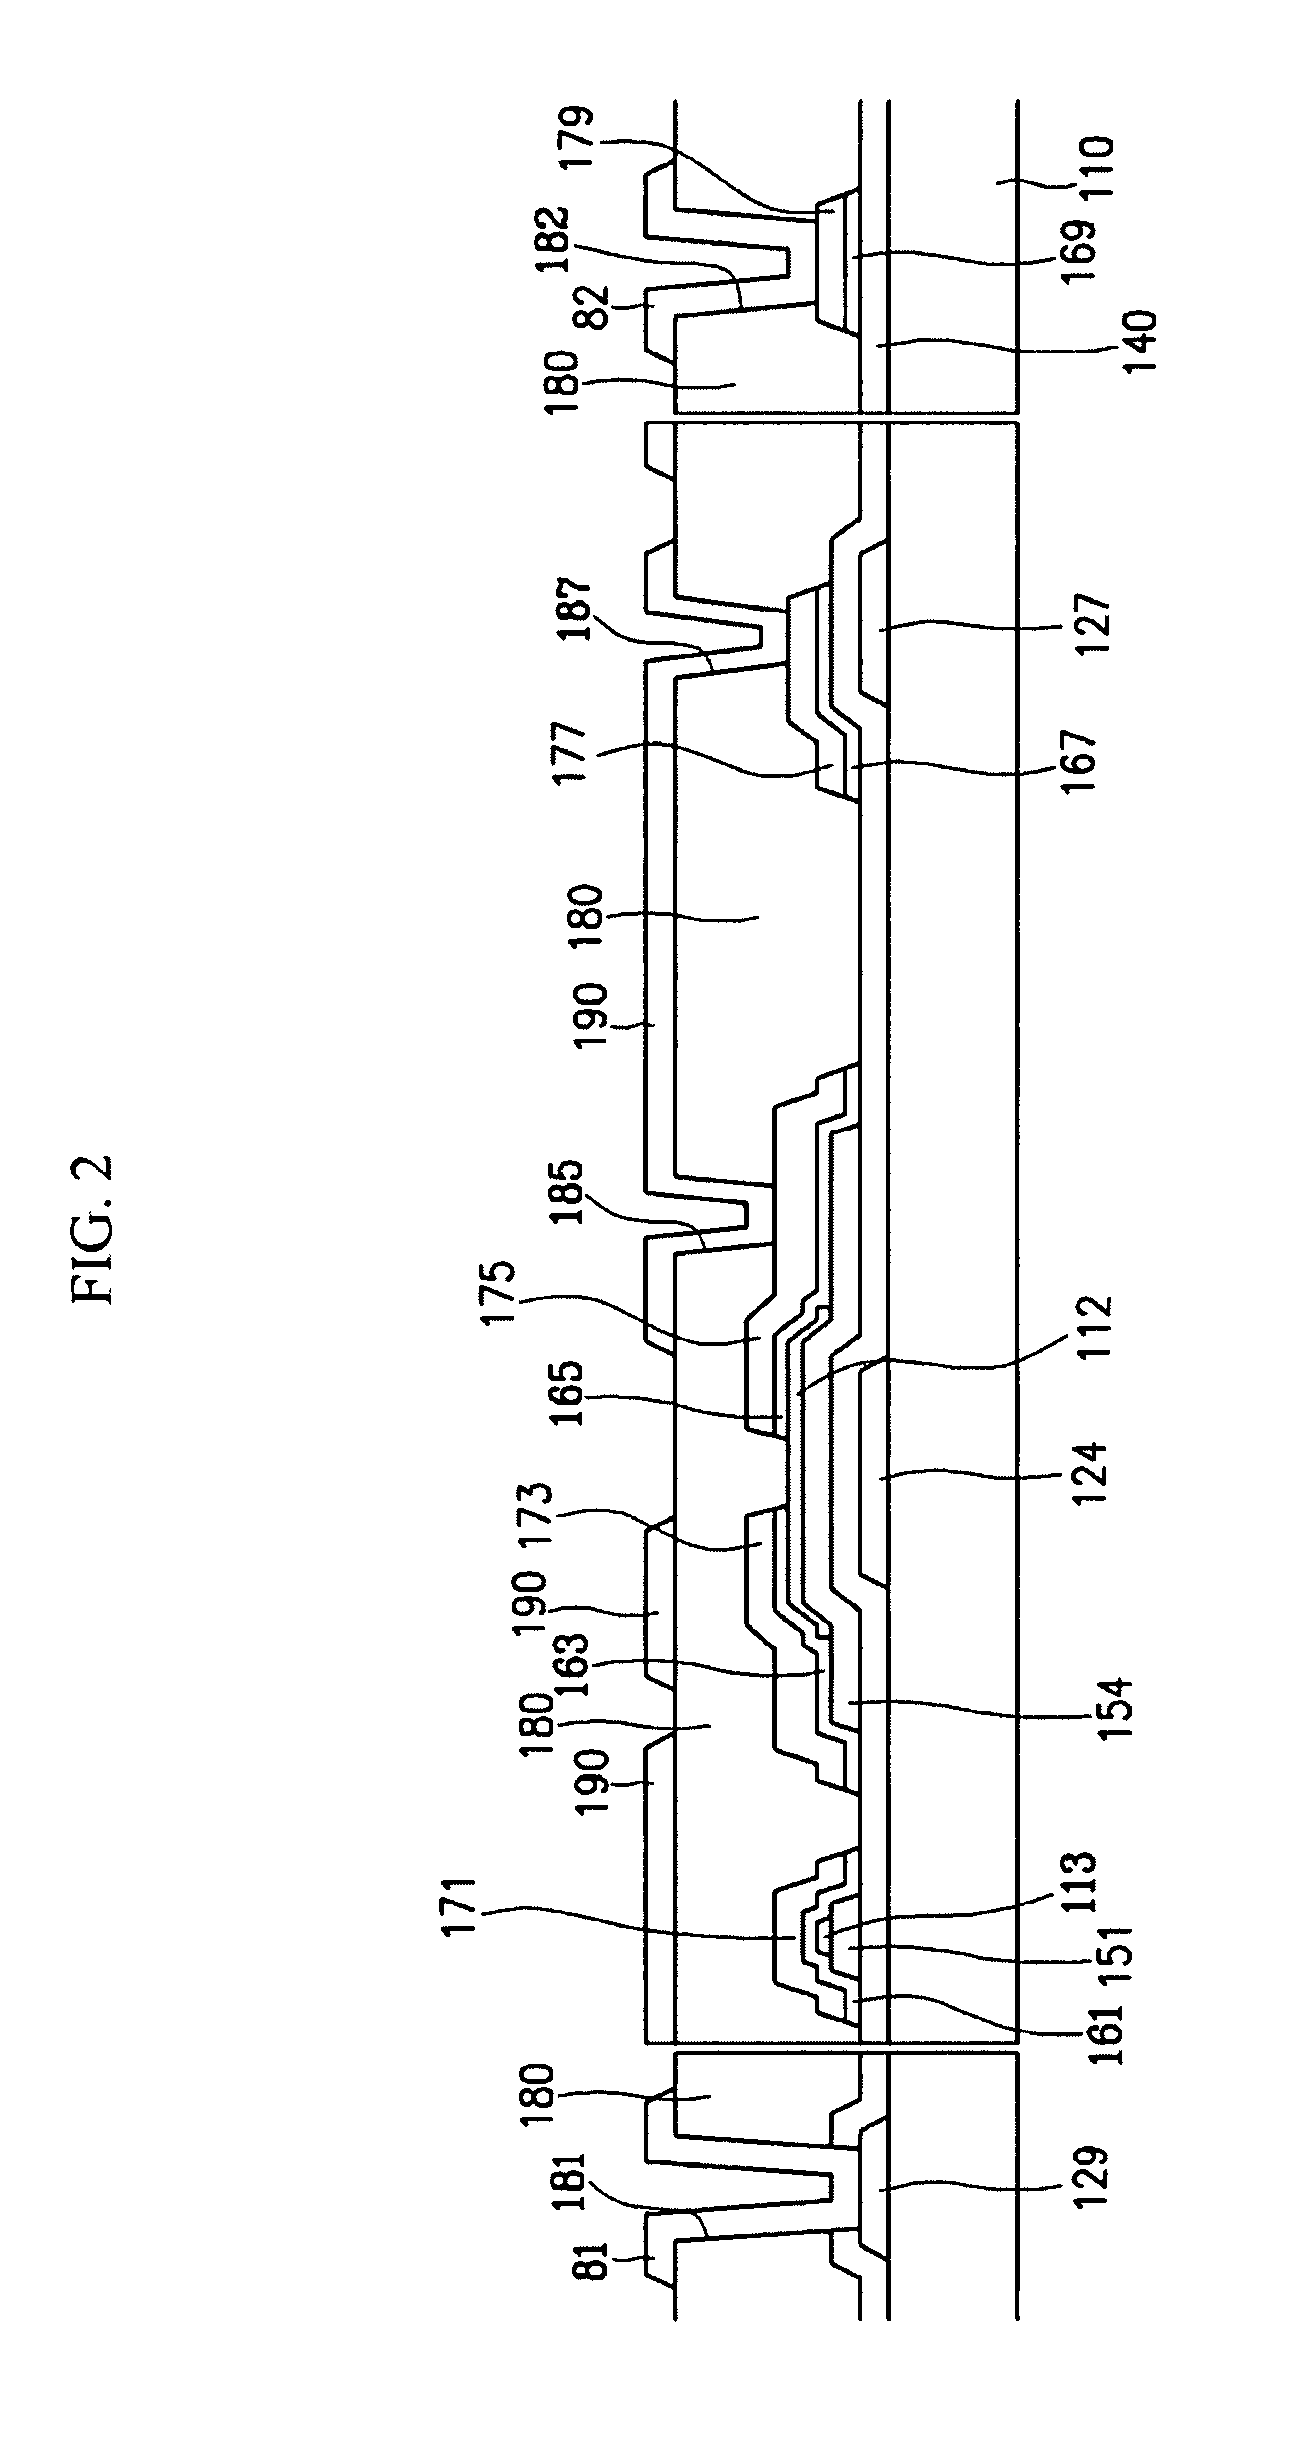 Thin film transistor array panel for a display device and a method of manufacturing the same